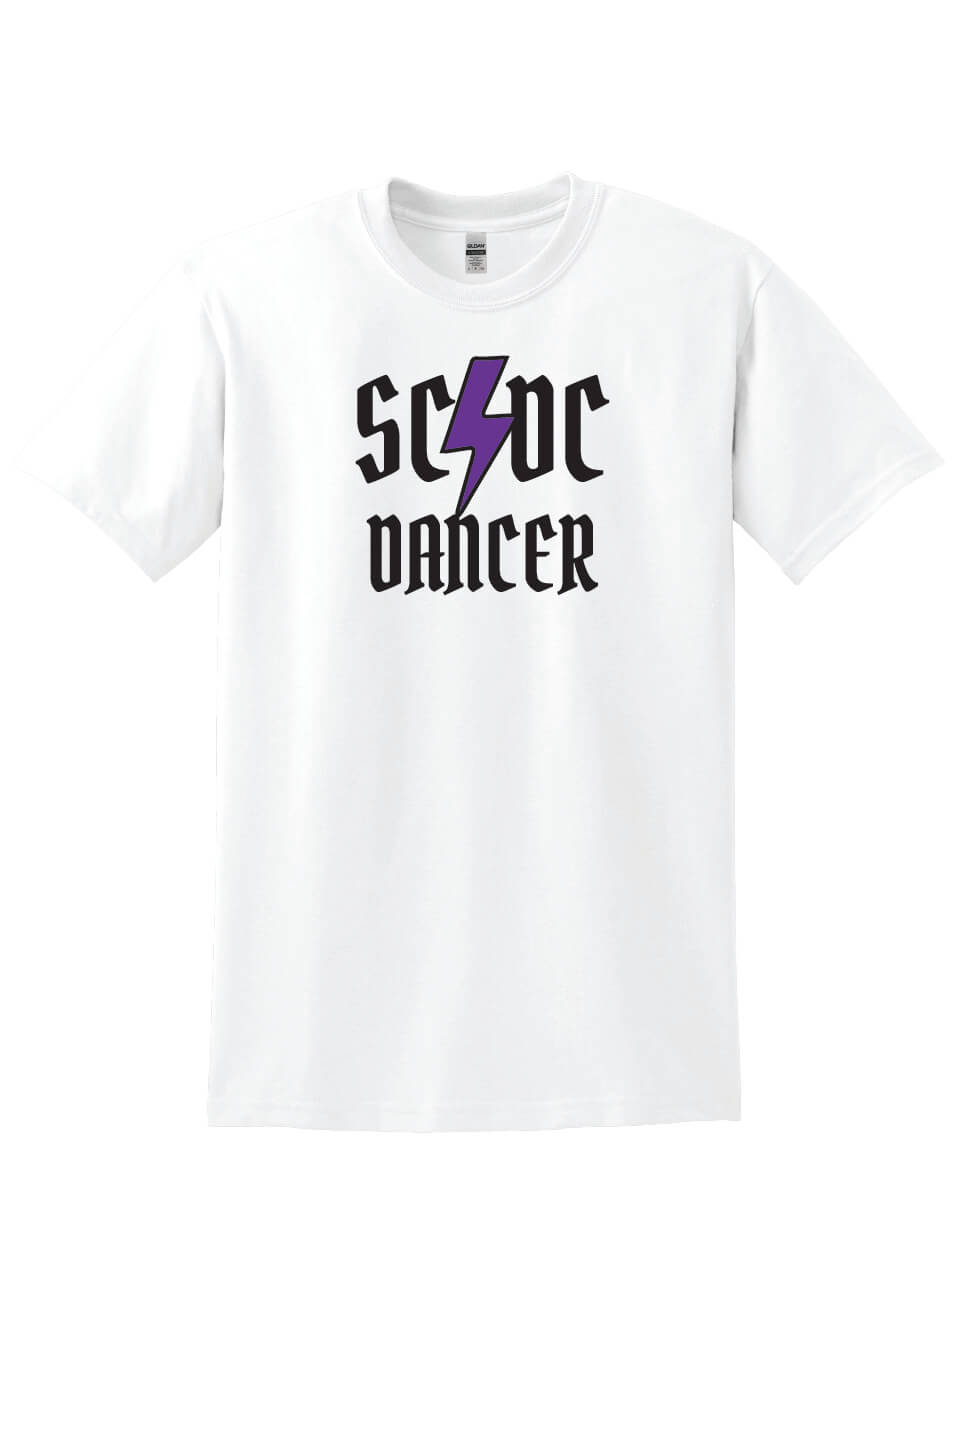 SCDC Short Sleeve T-Shirt (Youth) white